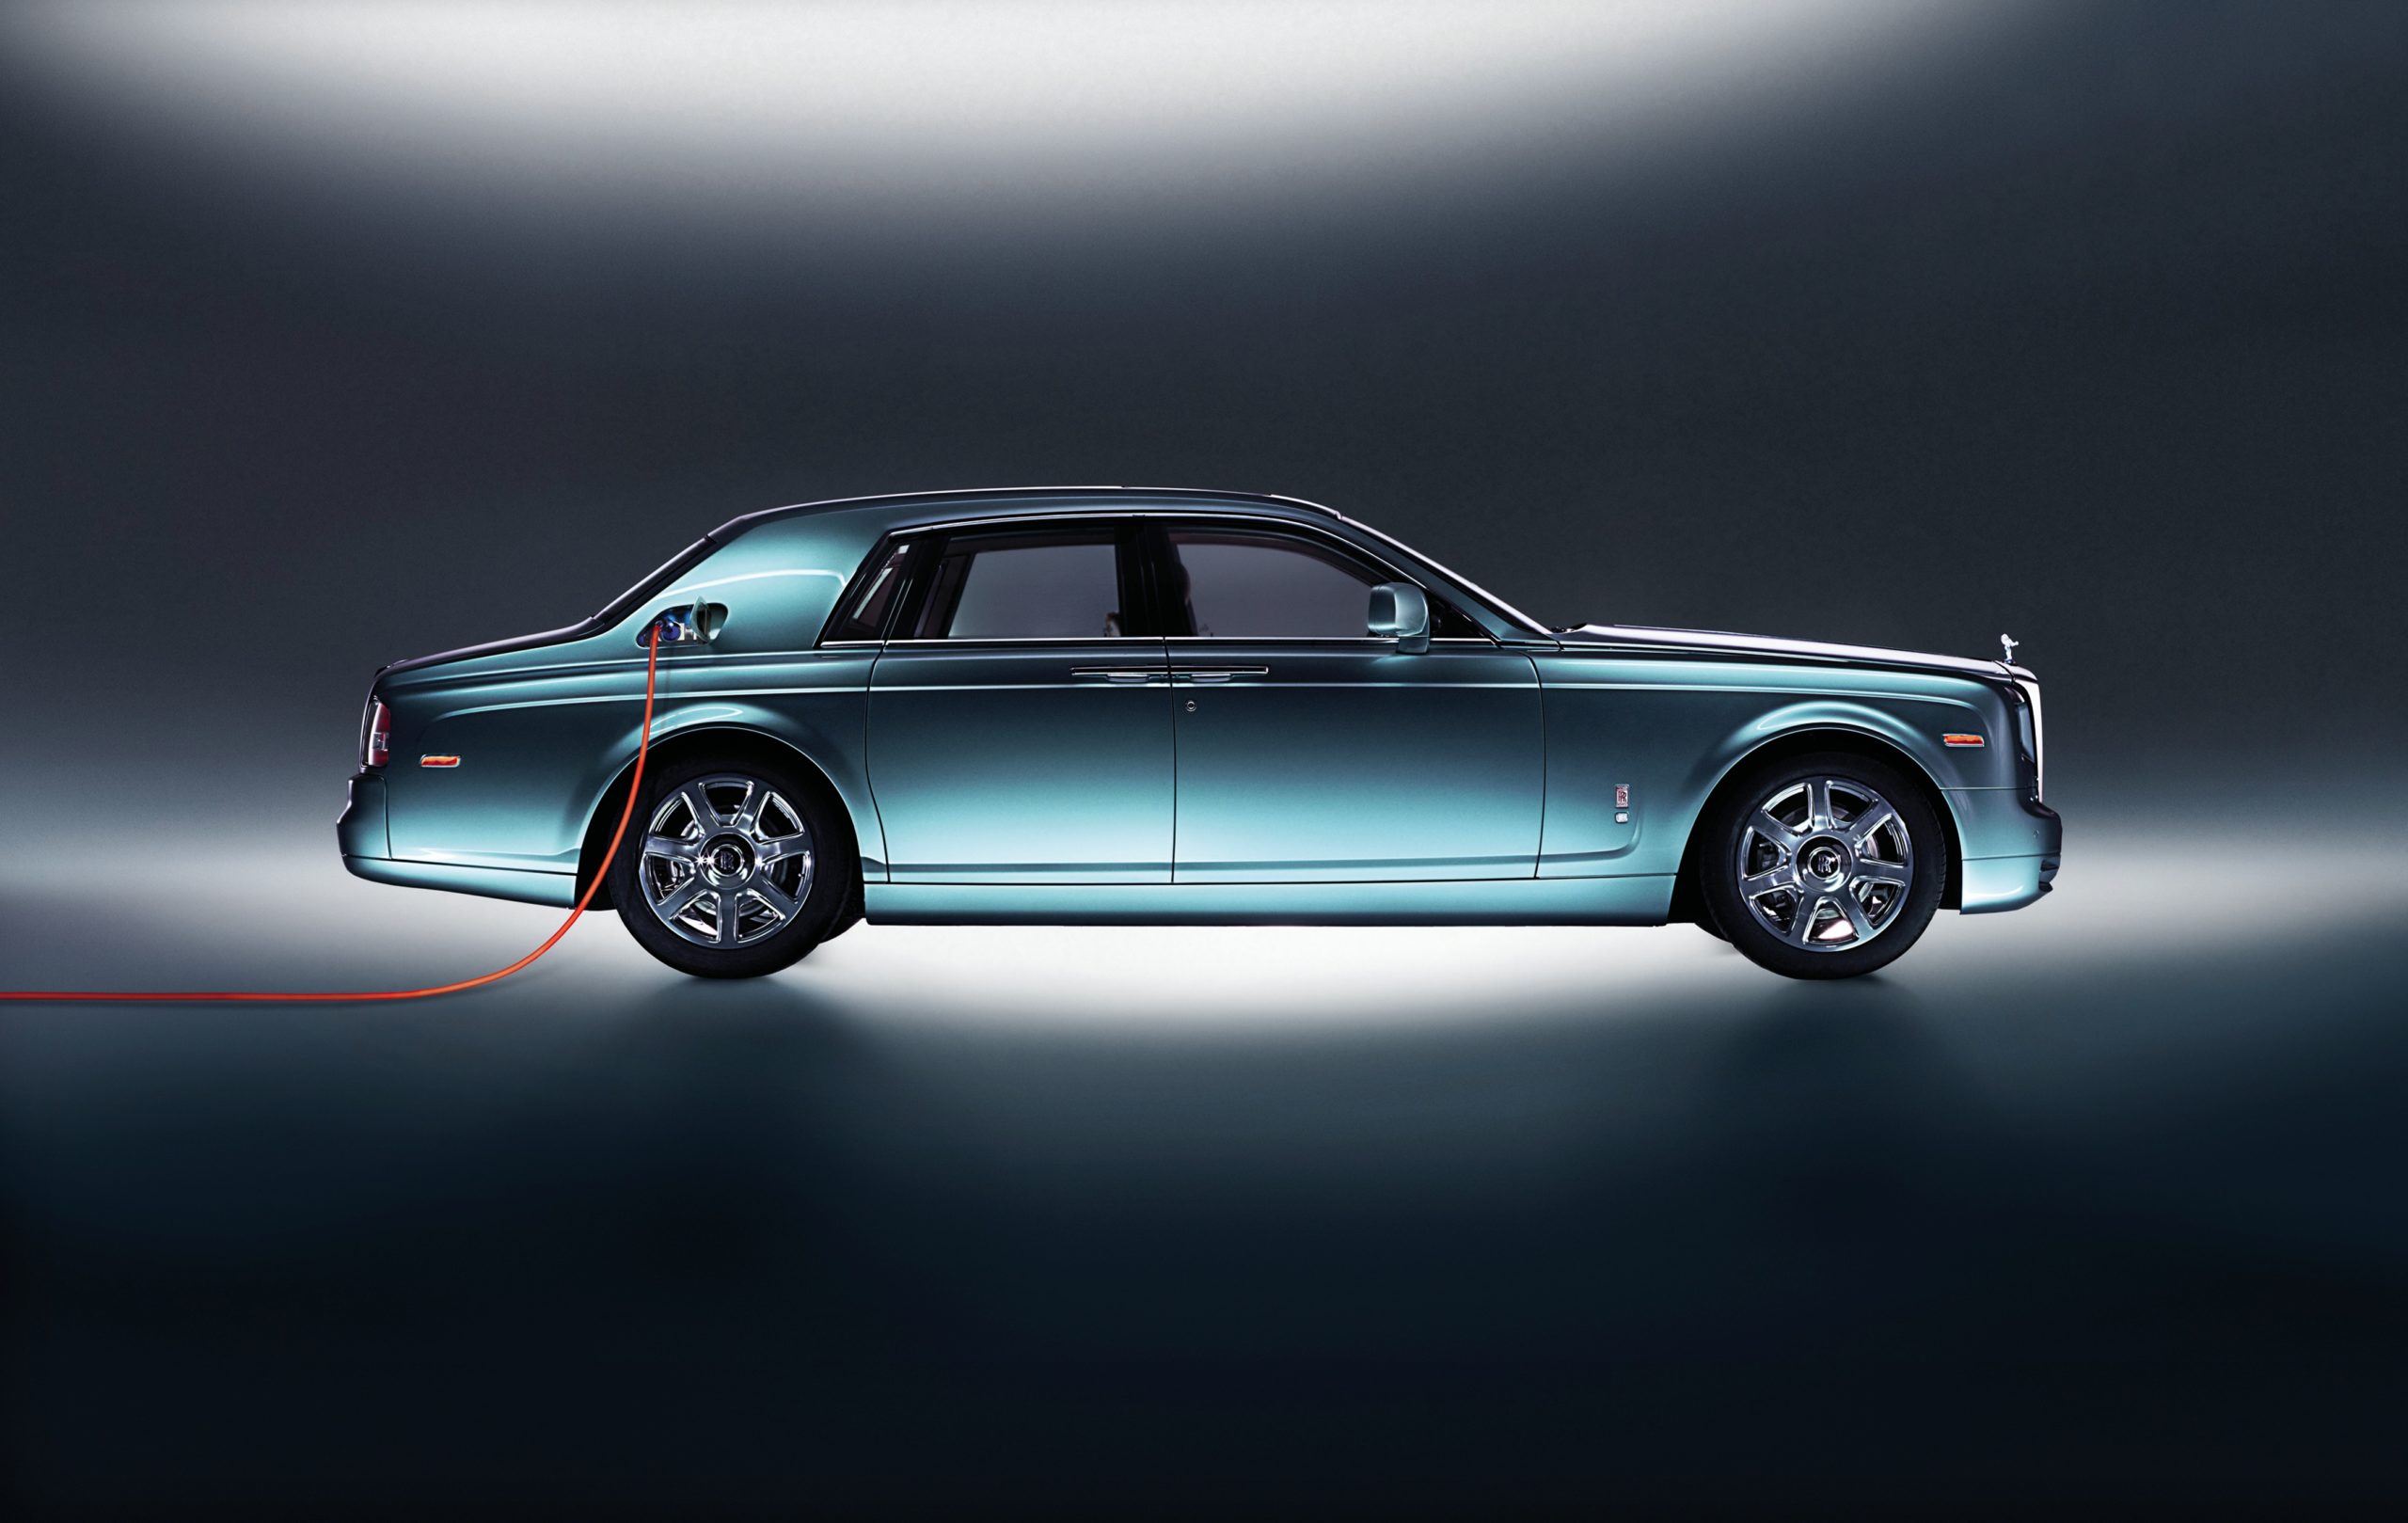 No more combustion engines at Rolls-Royce